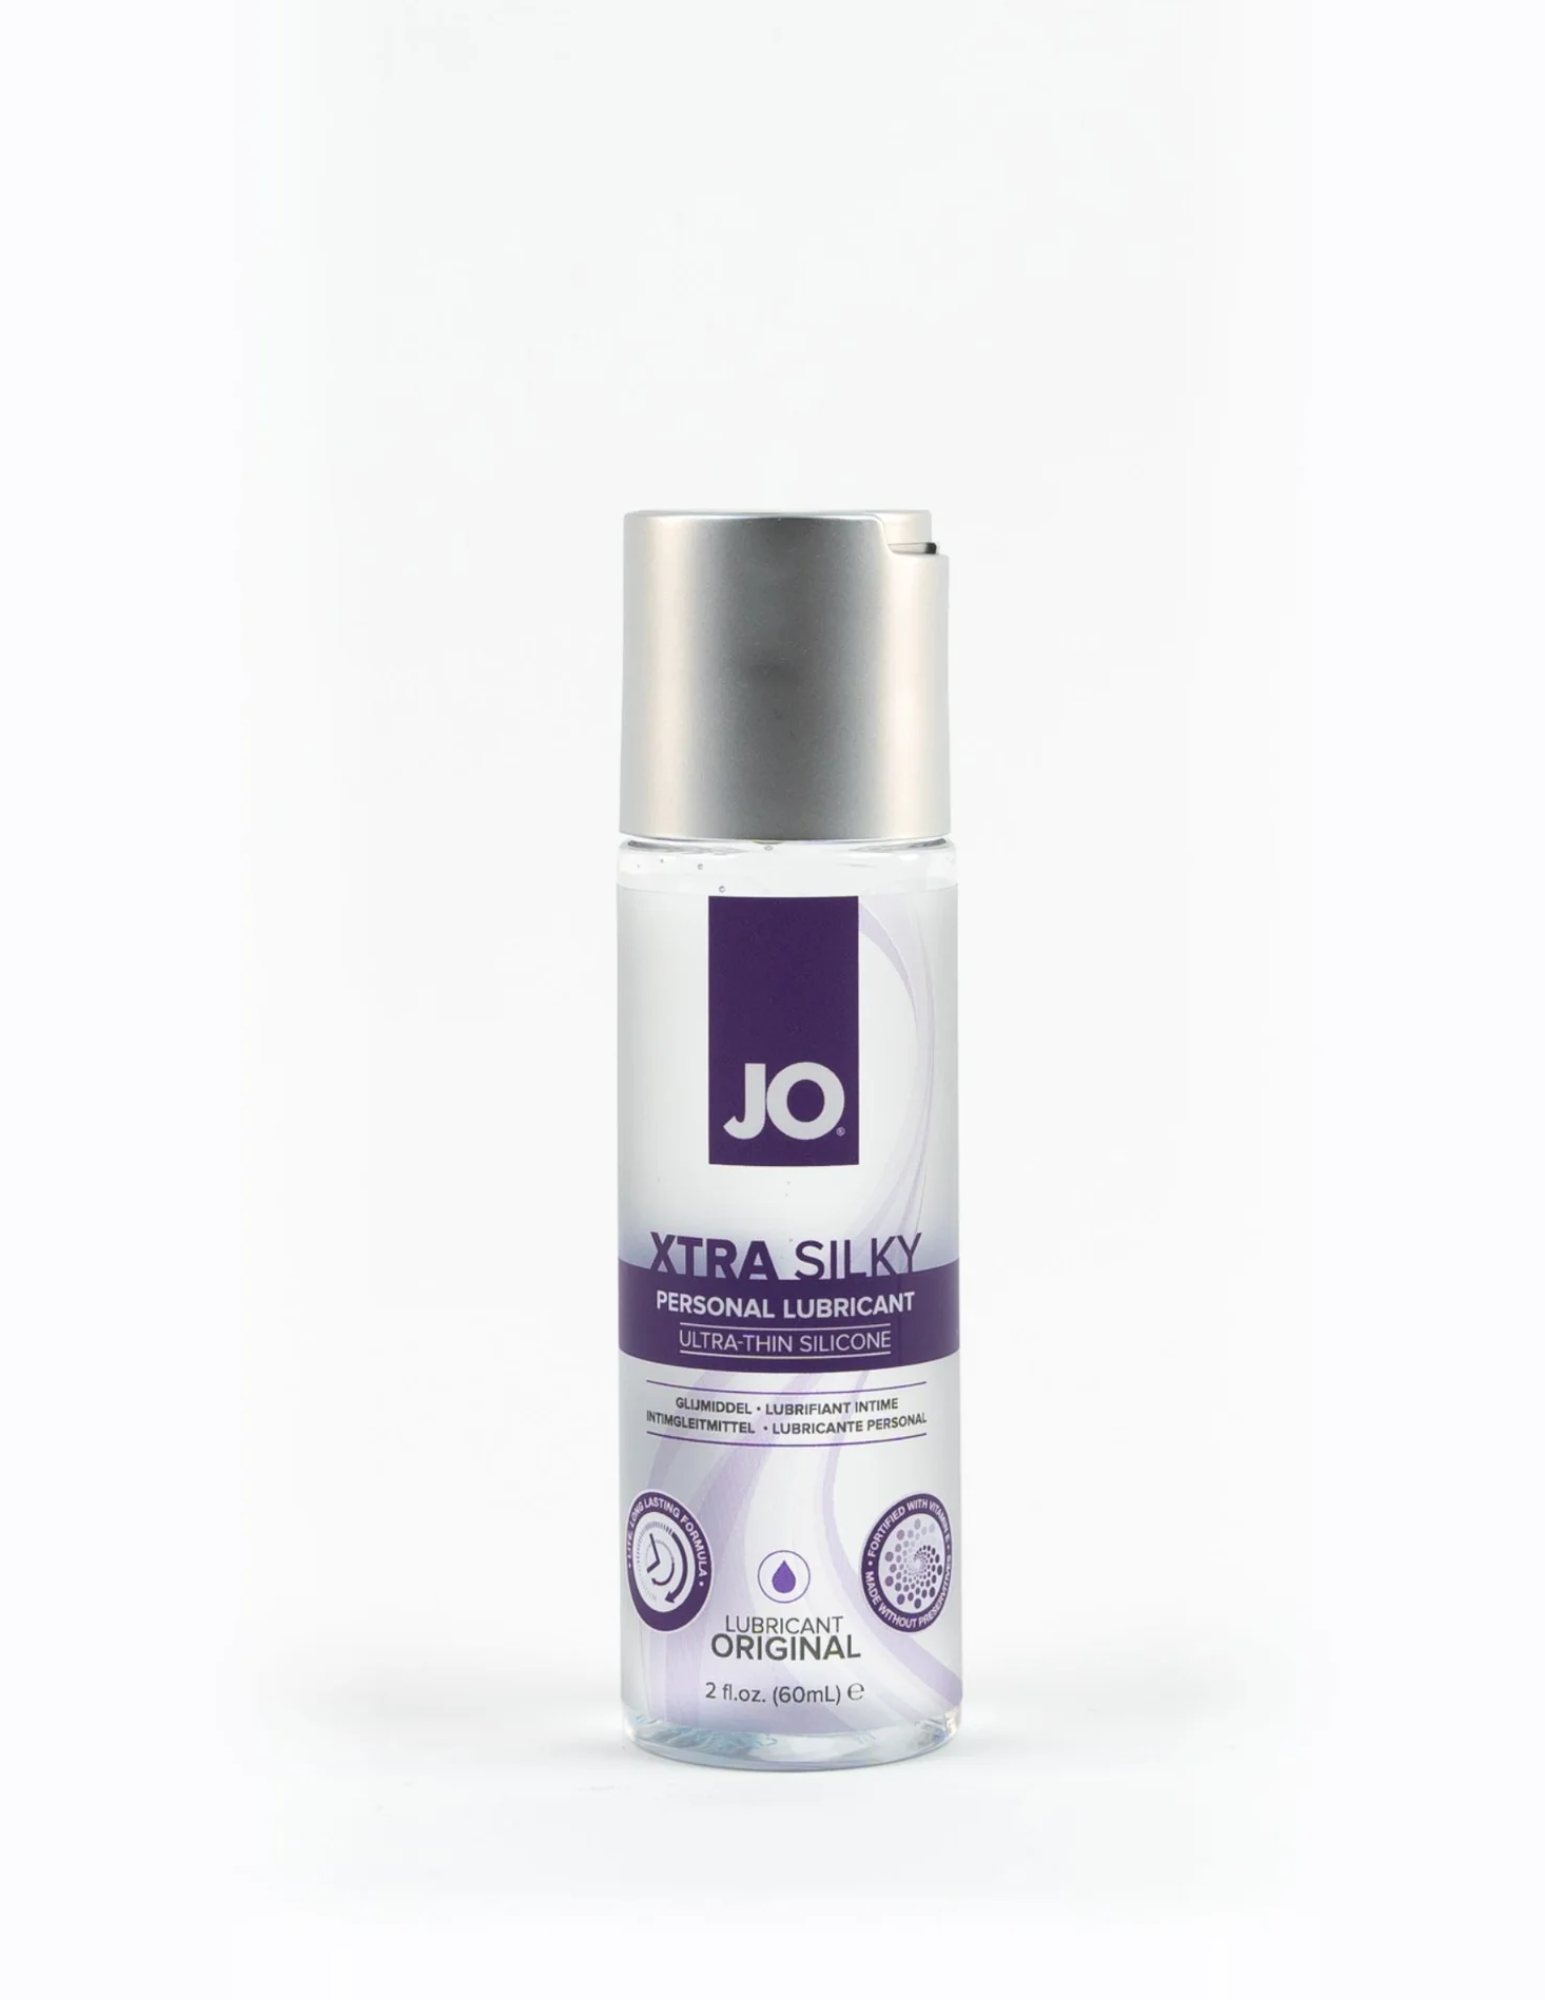 Photo of the front of the bottle of JO Xtra Silky Thin Silicone Lubricant, 2oz.